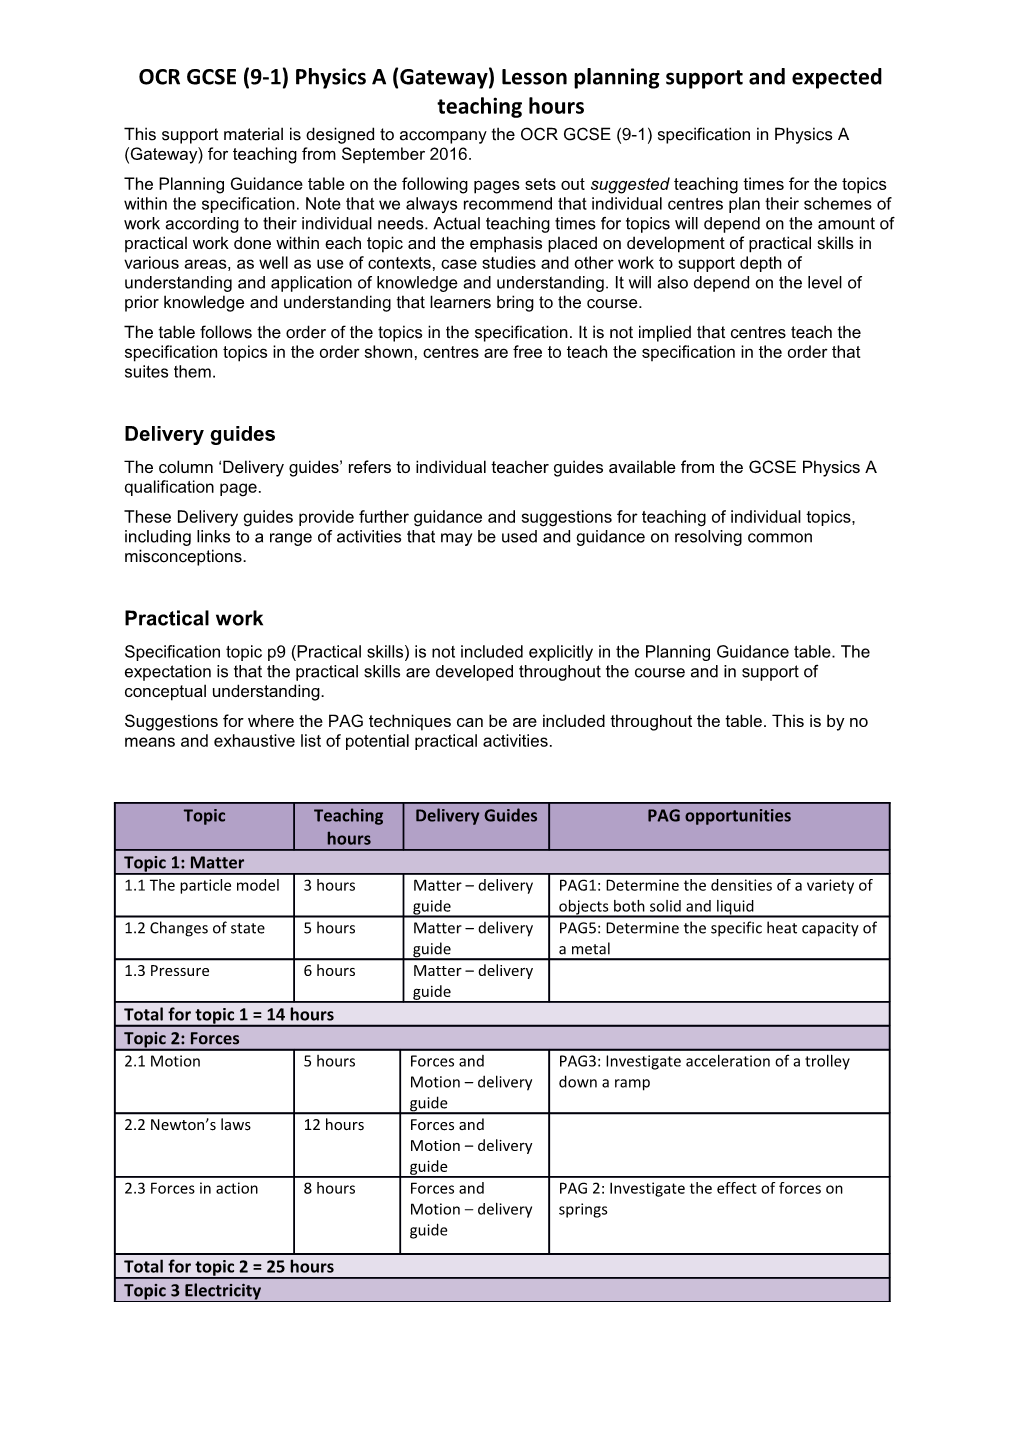 OCR GCSE (9-1) Physics a (Gateway) Lesson Planning Support and Expected Teaching Hours